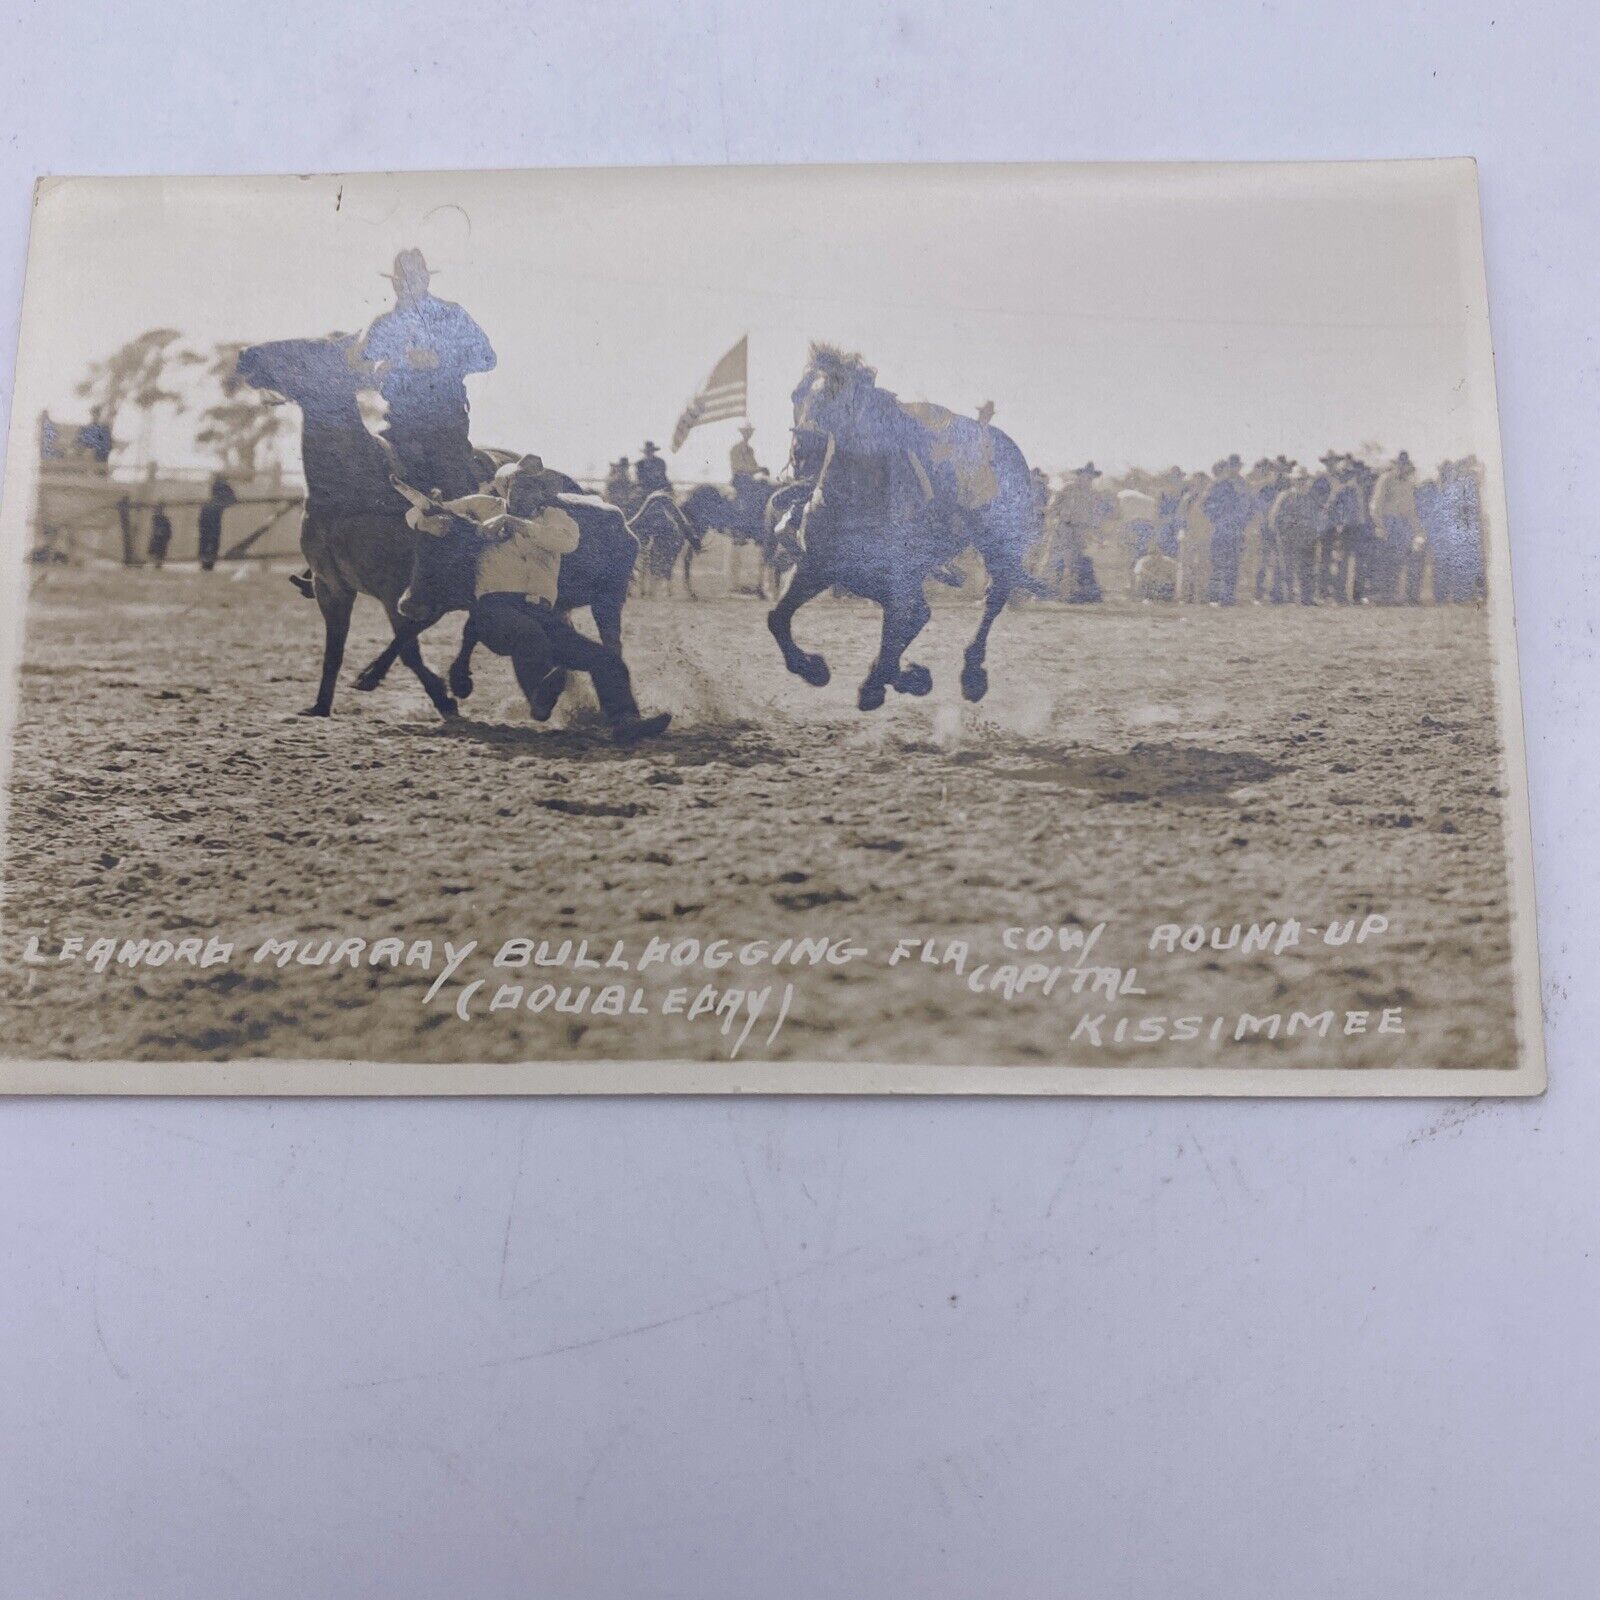 ANTIQUE REAL PHOTO POSTCARD COWBOY WESTERN RODEO LEANORD MURRAY BULLDOGGING